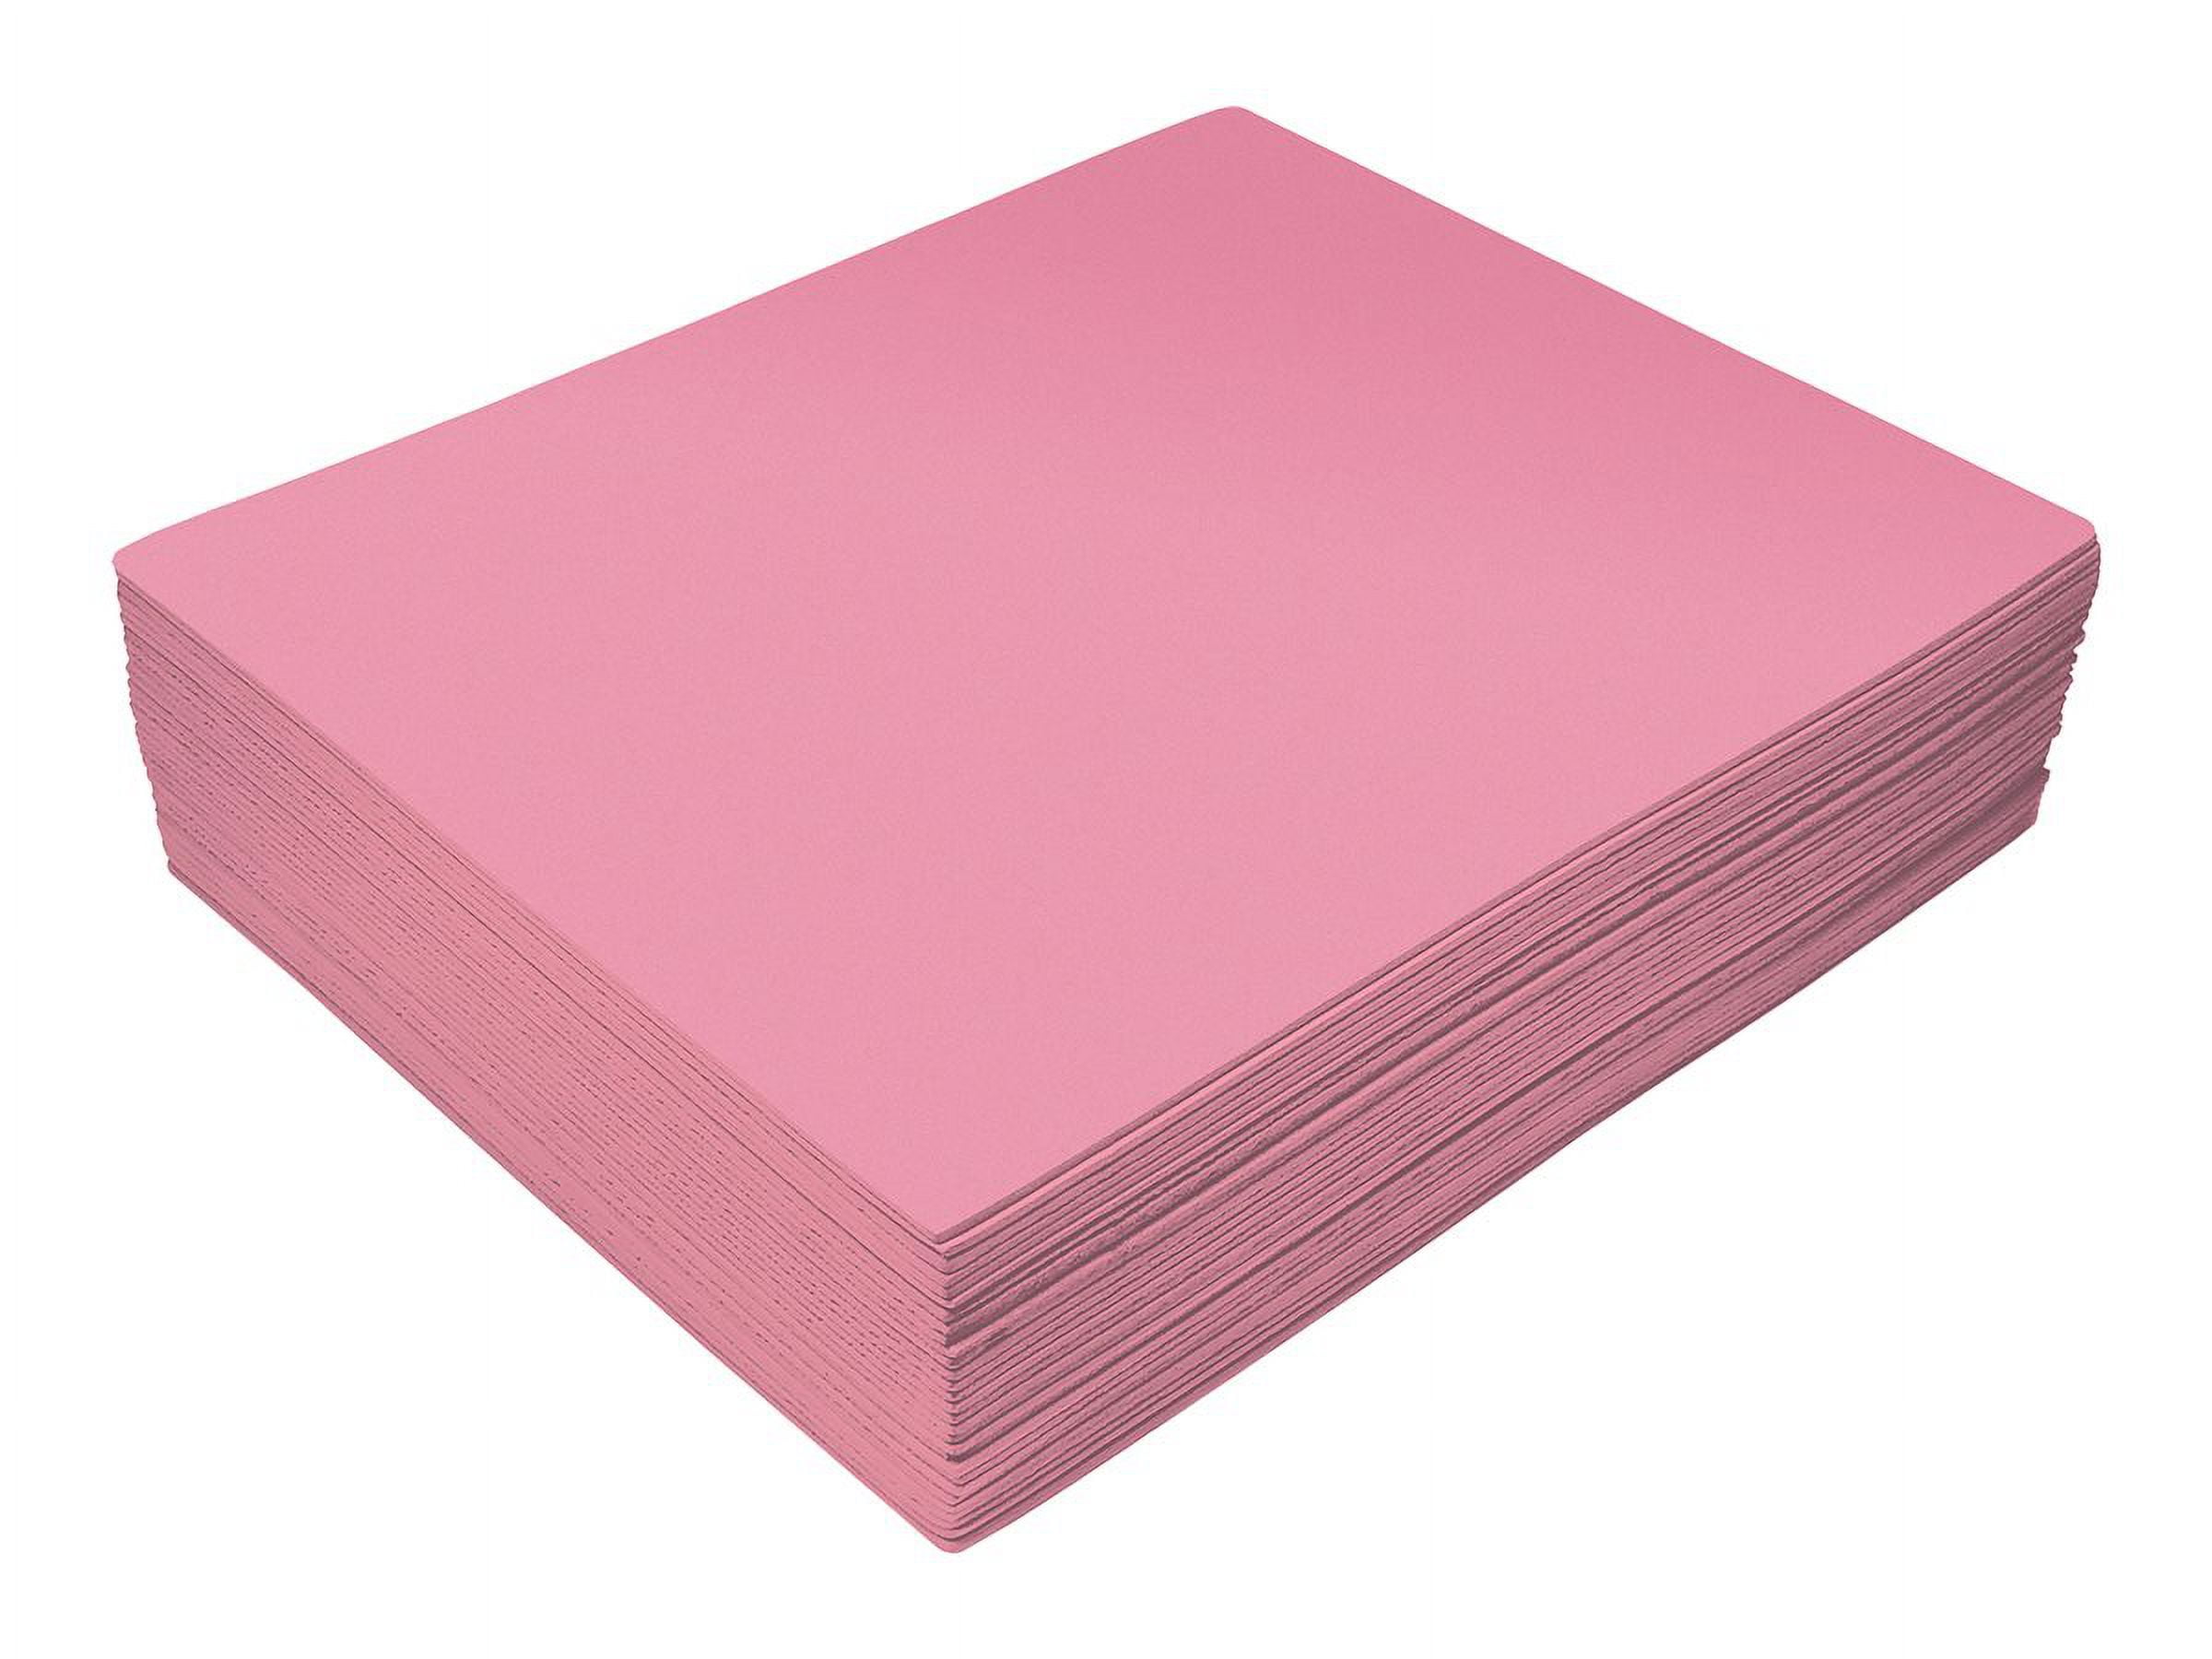 Red Eva Foam Sheets, 30 Pack, 2mm Thick, 9 x 12 inch, by Better Office Products